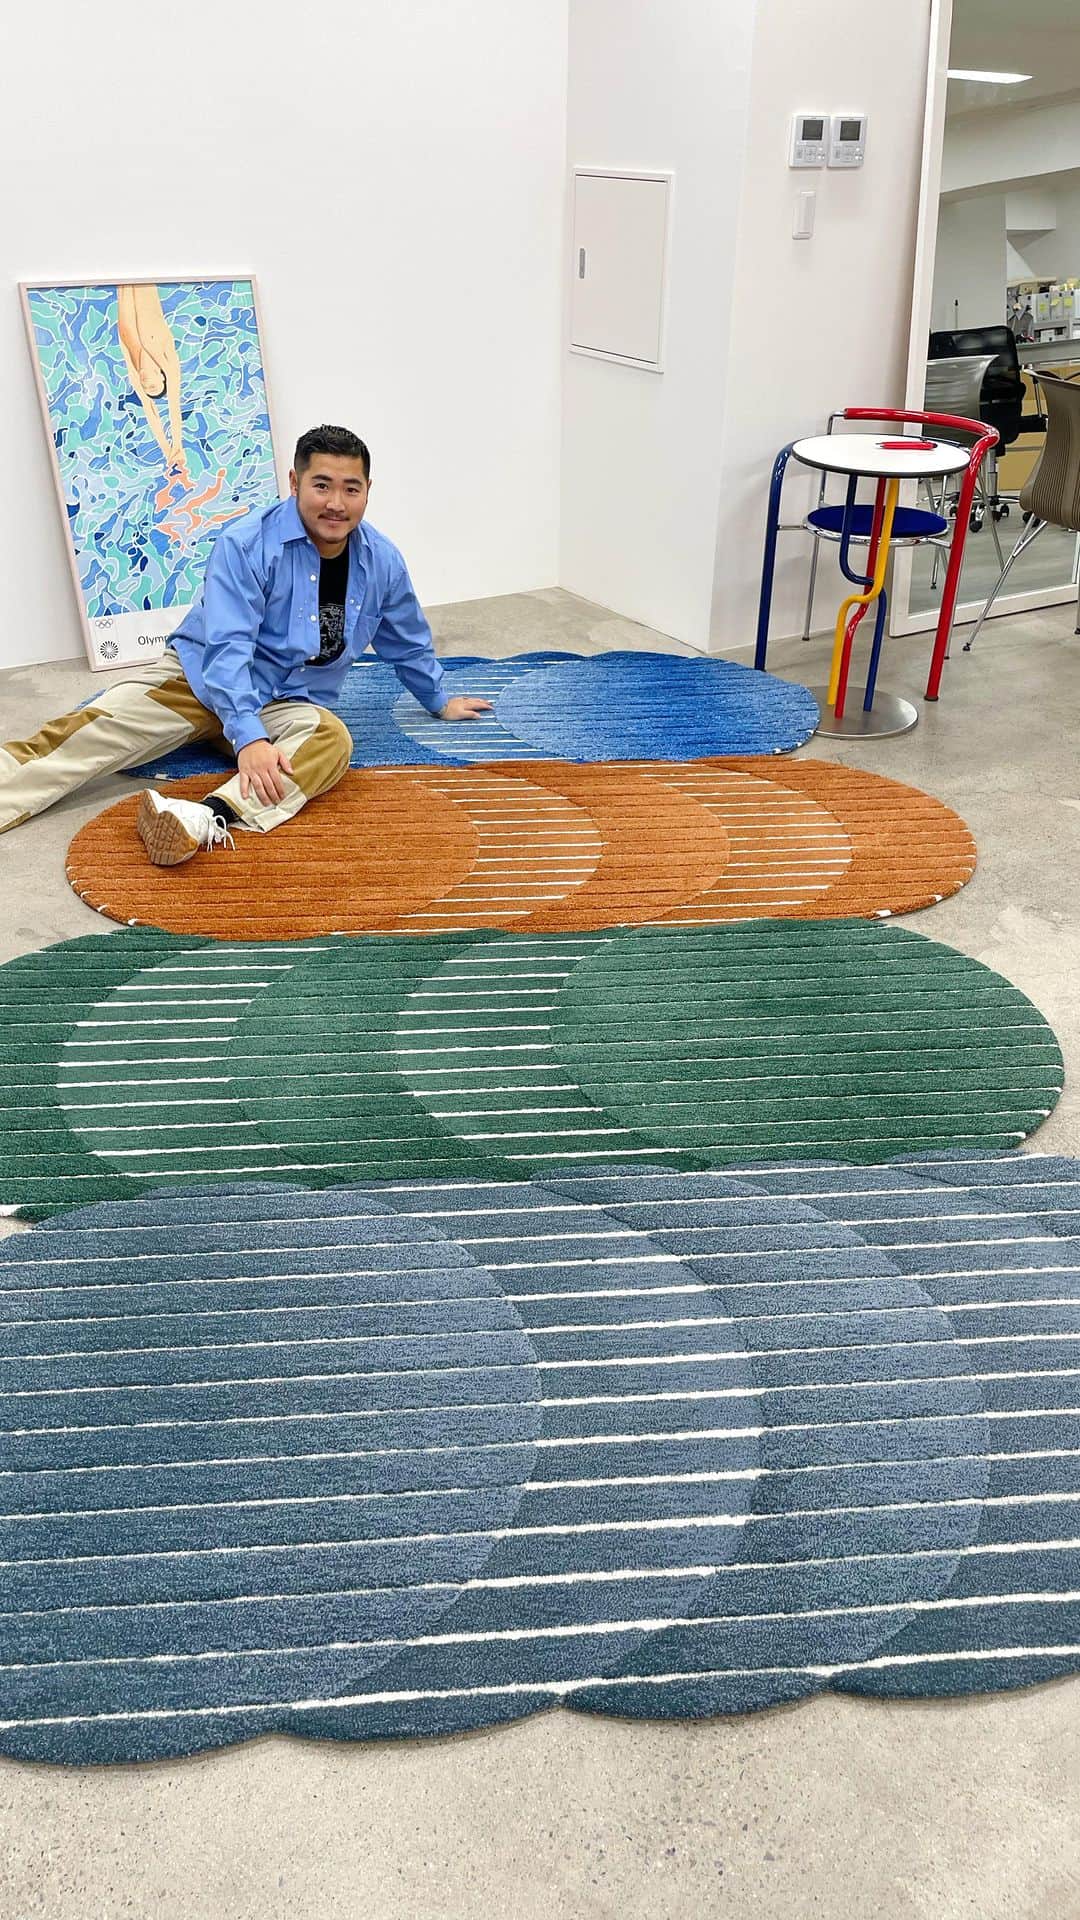 KEISUKE SYODAのインスタグラム：「Be careful, the rug tricks on your vision. Here’s an optical illusion rug ✨」